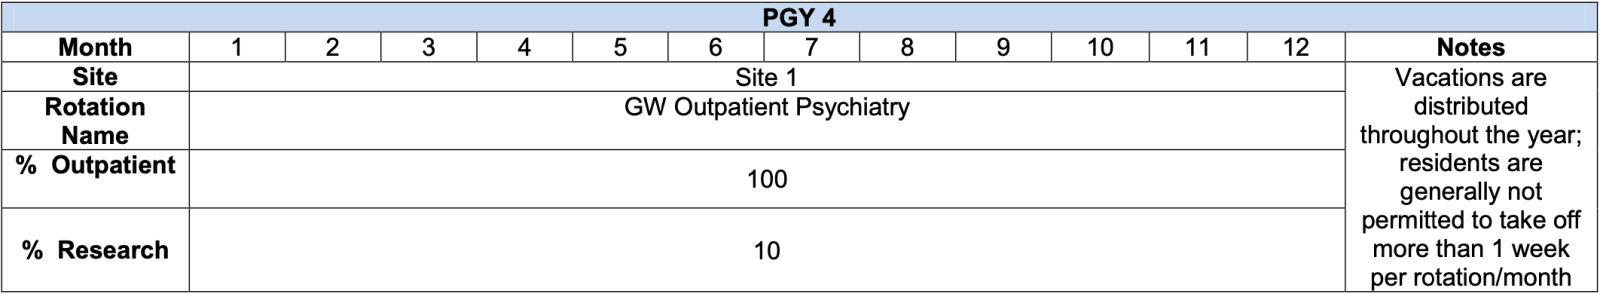 PGY4 schedule